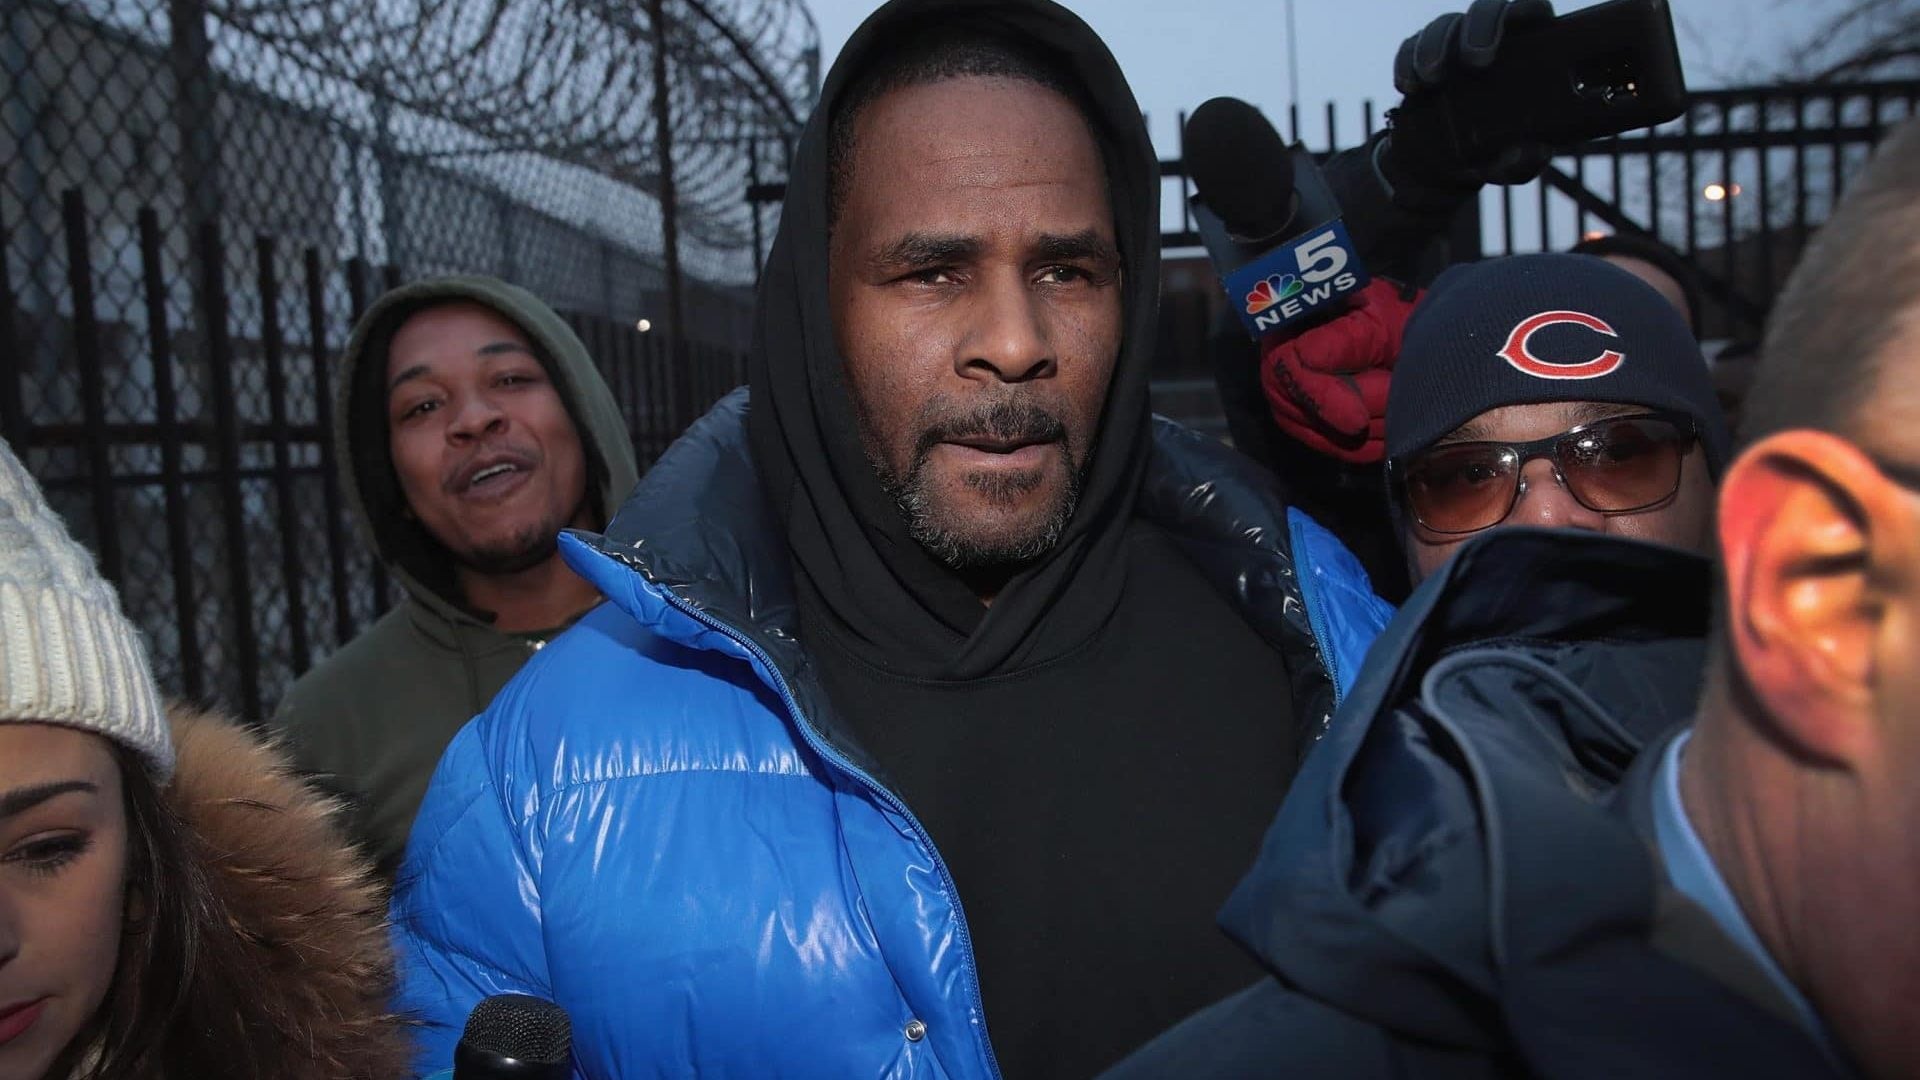 R. Kelly Gives Fans 28-Second Performance, Begs Press To 'Take It Easy' On Him